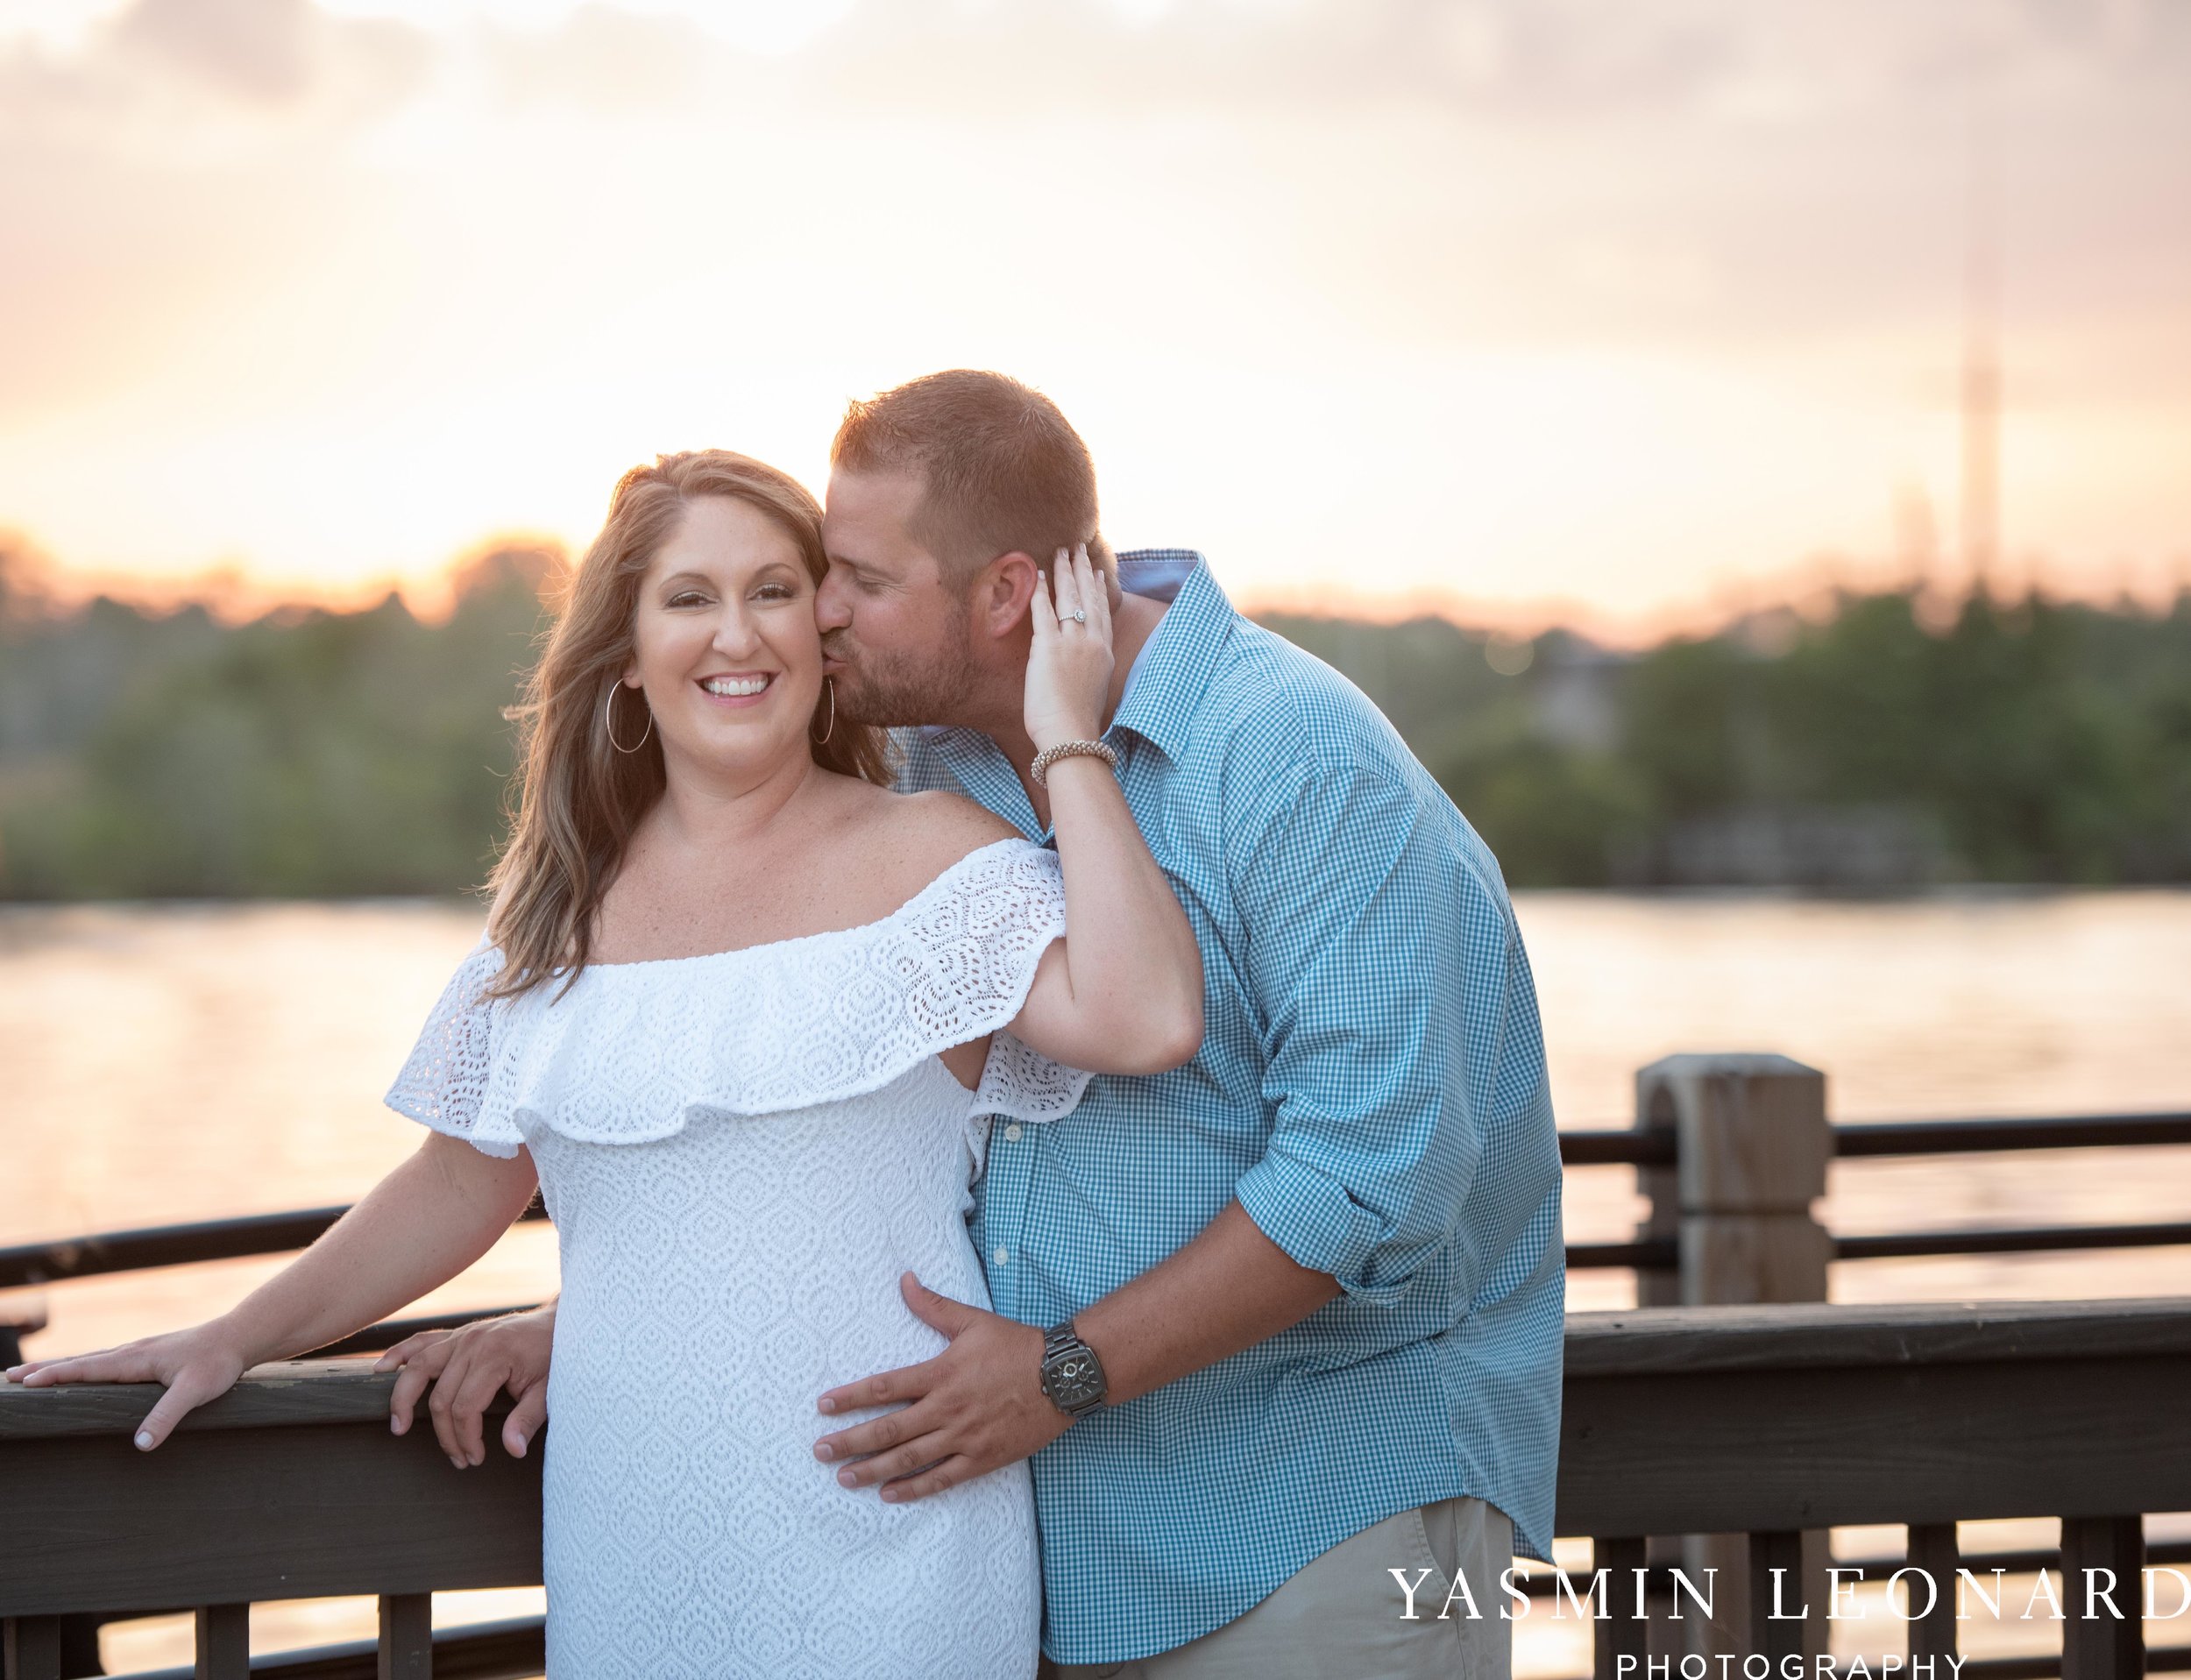 Wrightsville Beach Engagement Session - Wilmington Engagement Session - Downtown Wilmington Engagement Session - NC Weddings - Wilmington NC - Yasmin Leonard Photography-17.jpg